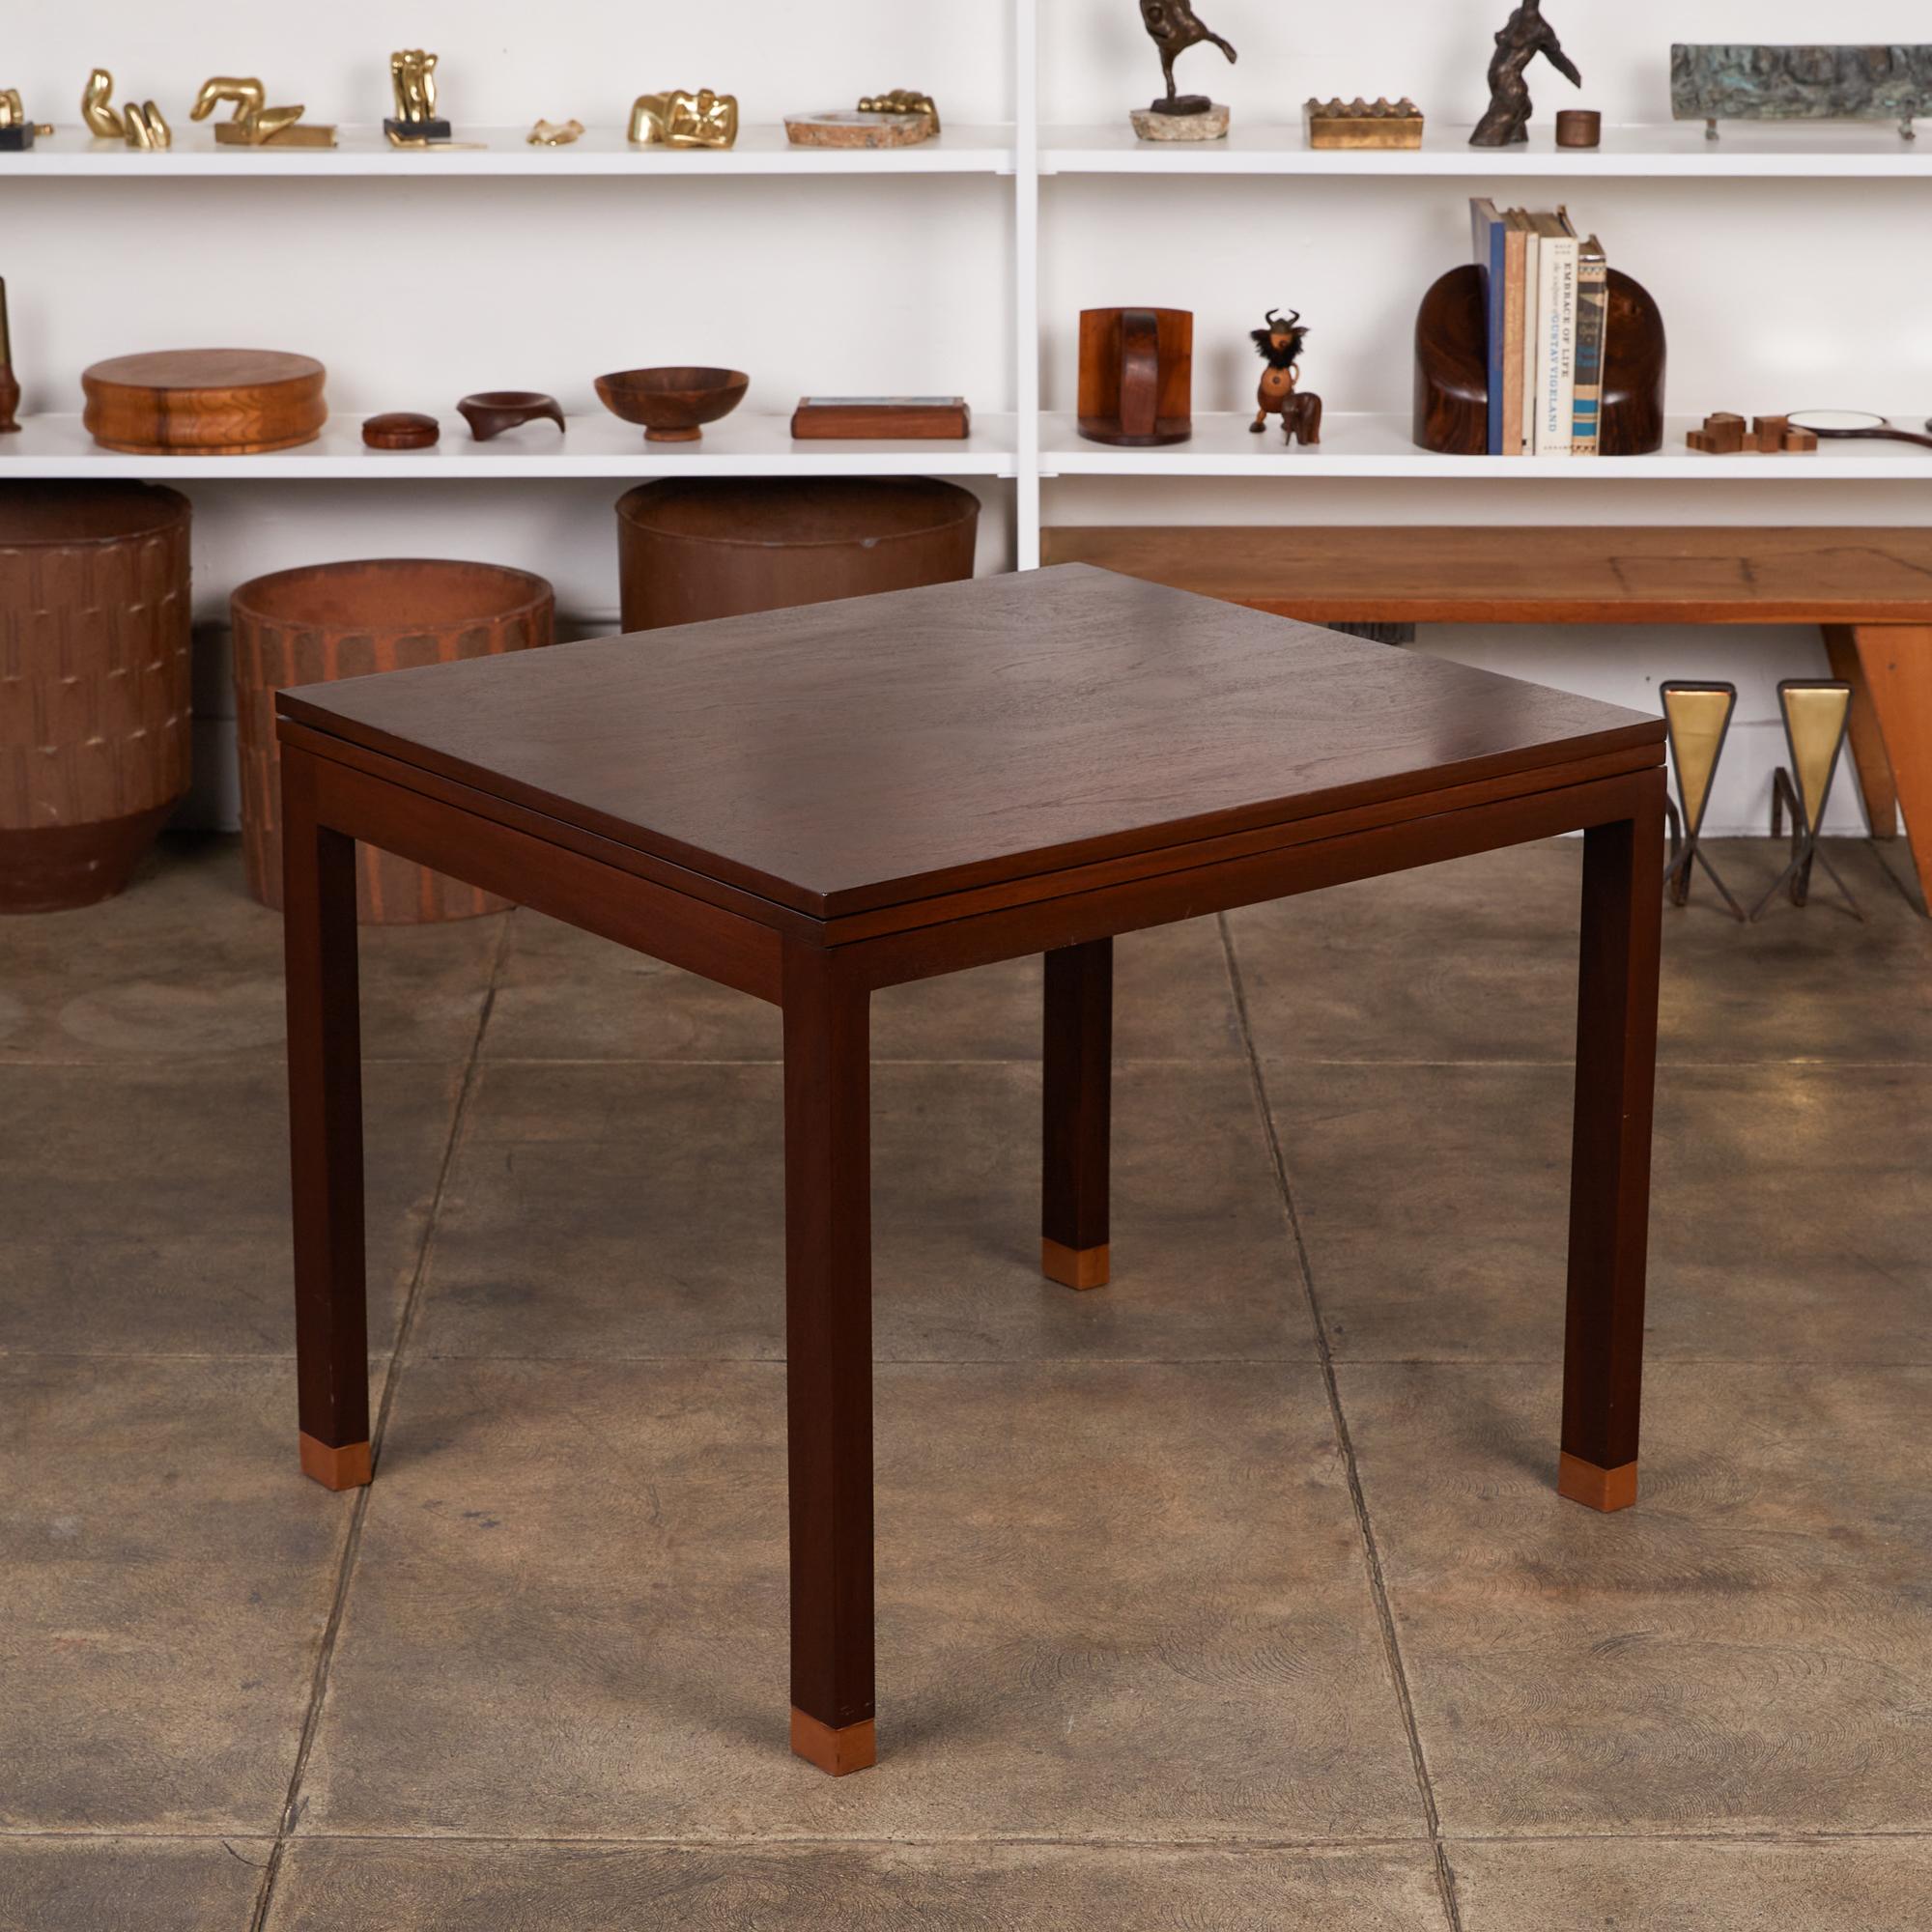 Edward Wormley for Dunbar flip-top table, USA, c.1960s. This square Parsons table features a flip top that allows it to serve as a cafe/dining table or game table. The dark stained mahogany legs are accented by leather wrapped tips. The table also